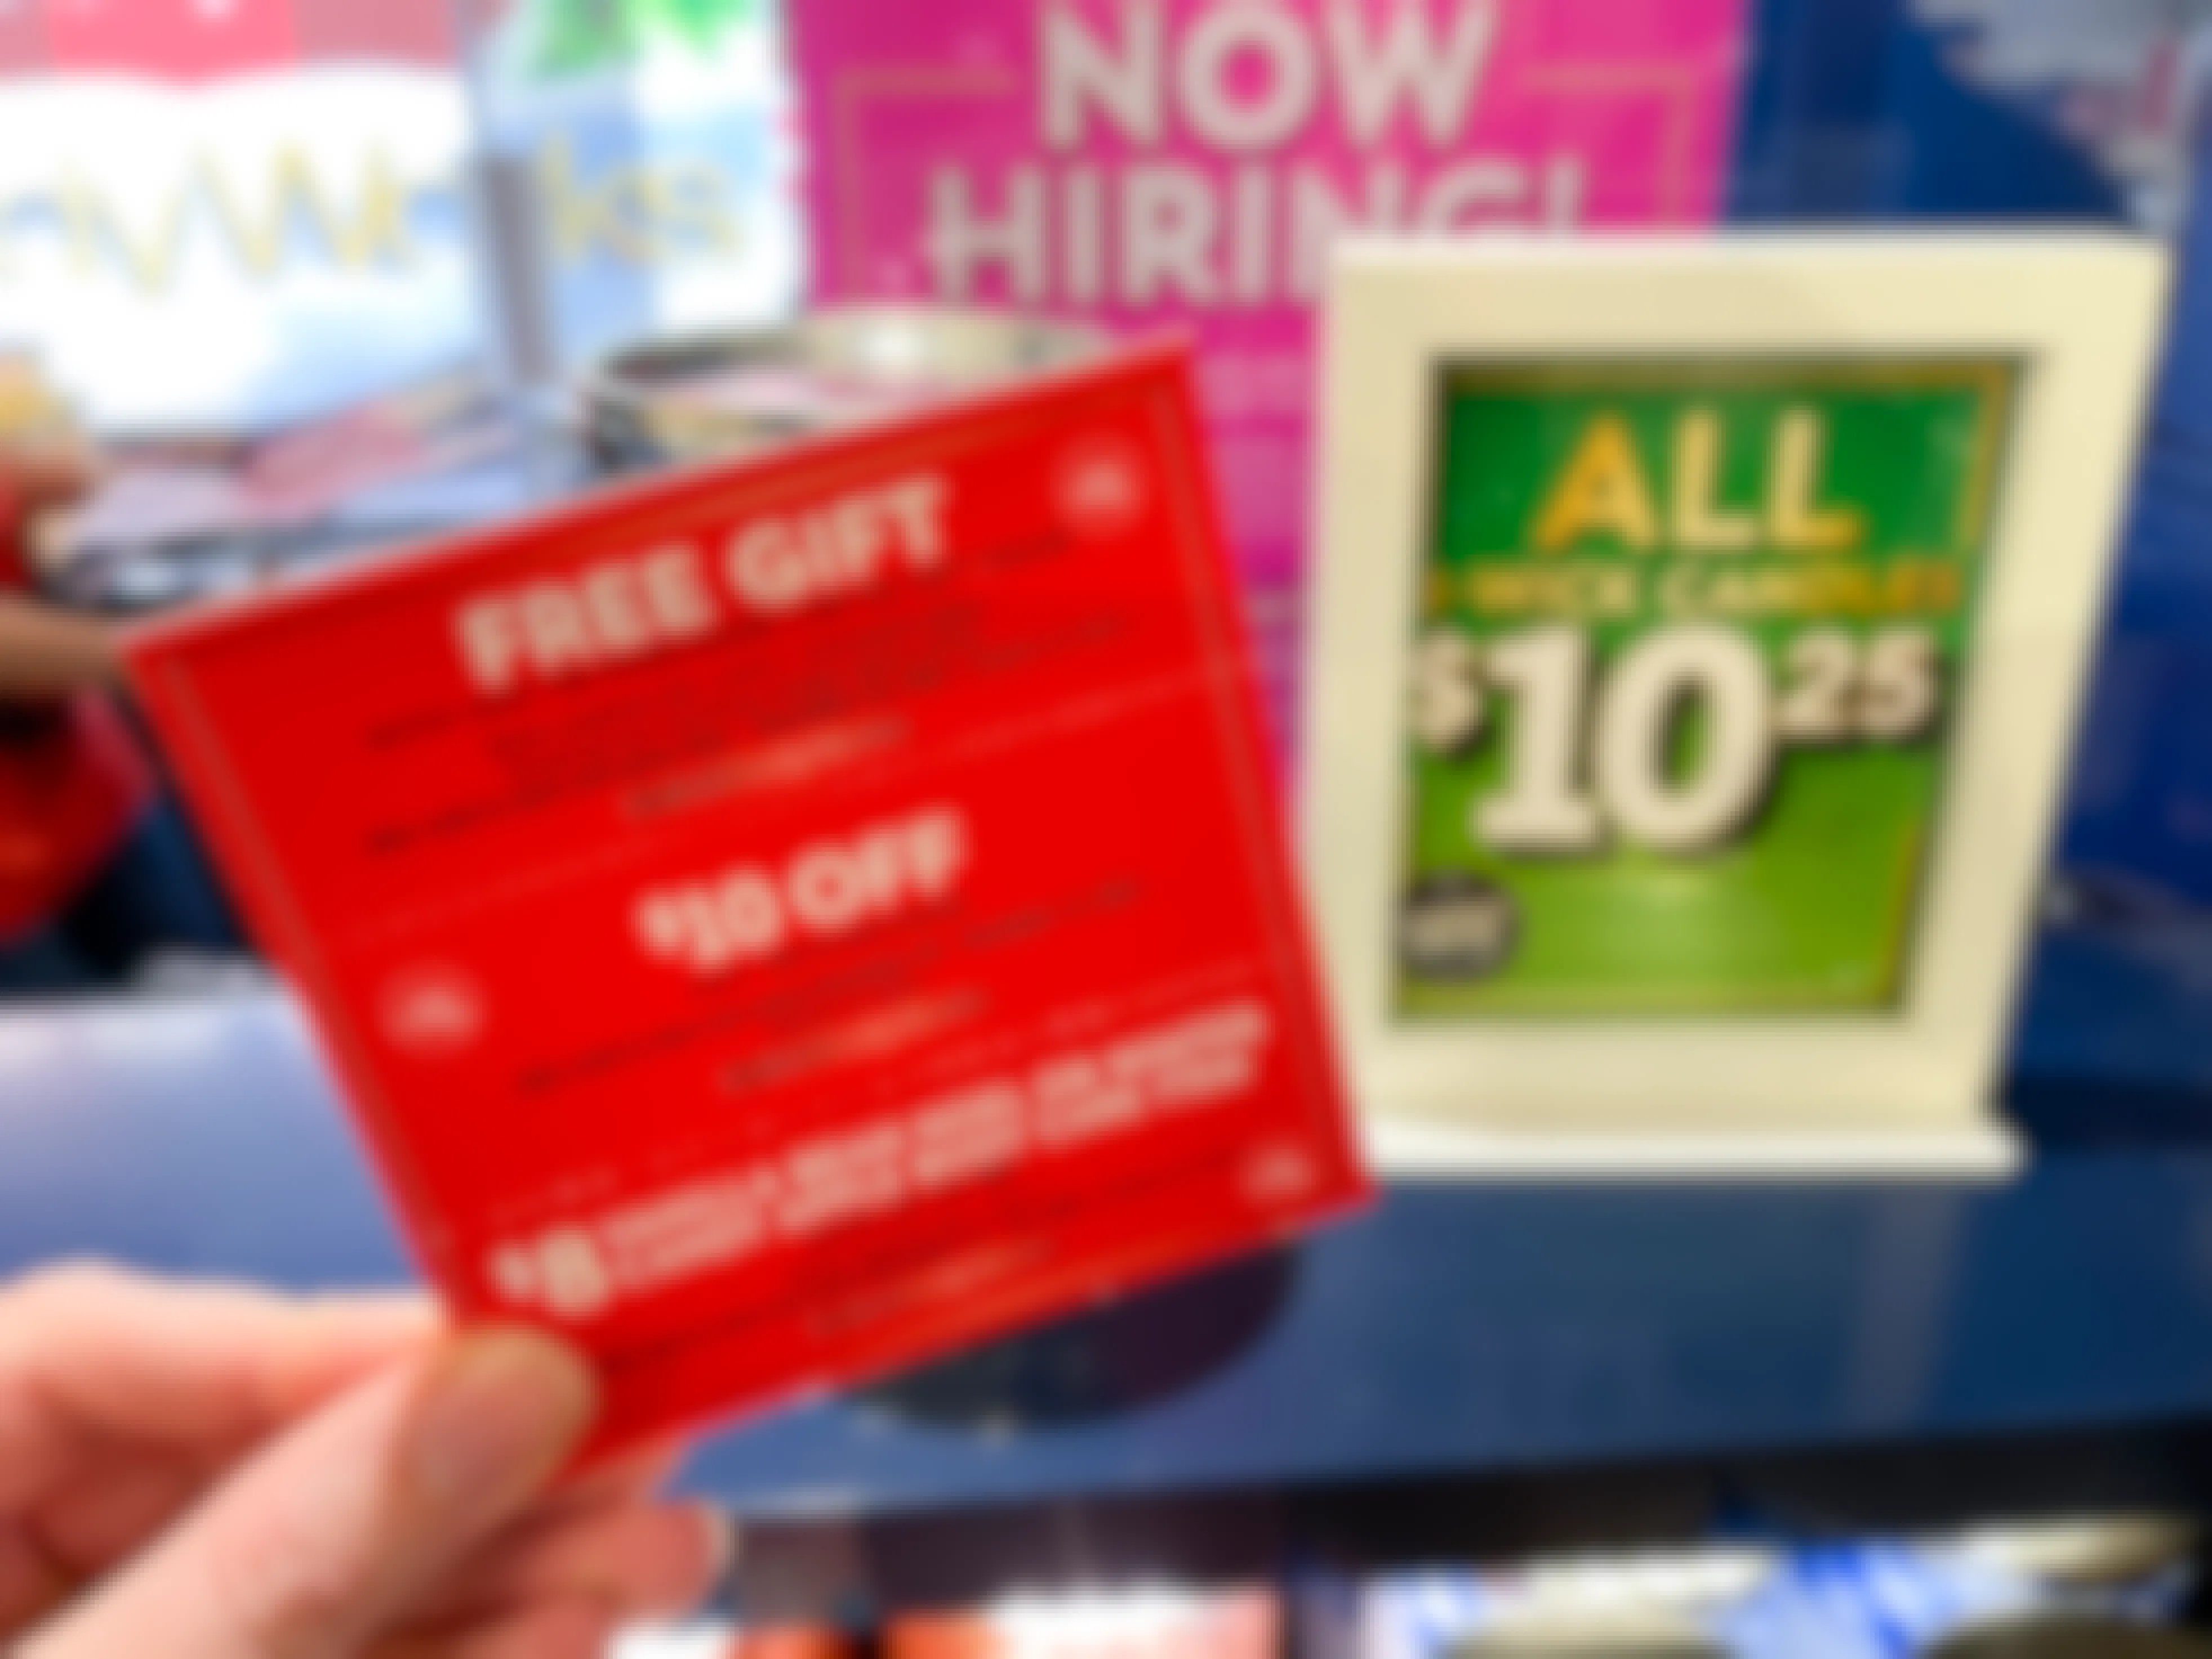 A woman holding bath and body works coupons next to a candle day sale sign